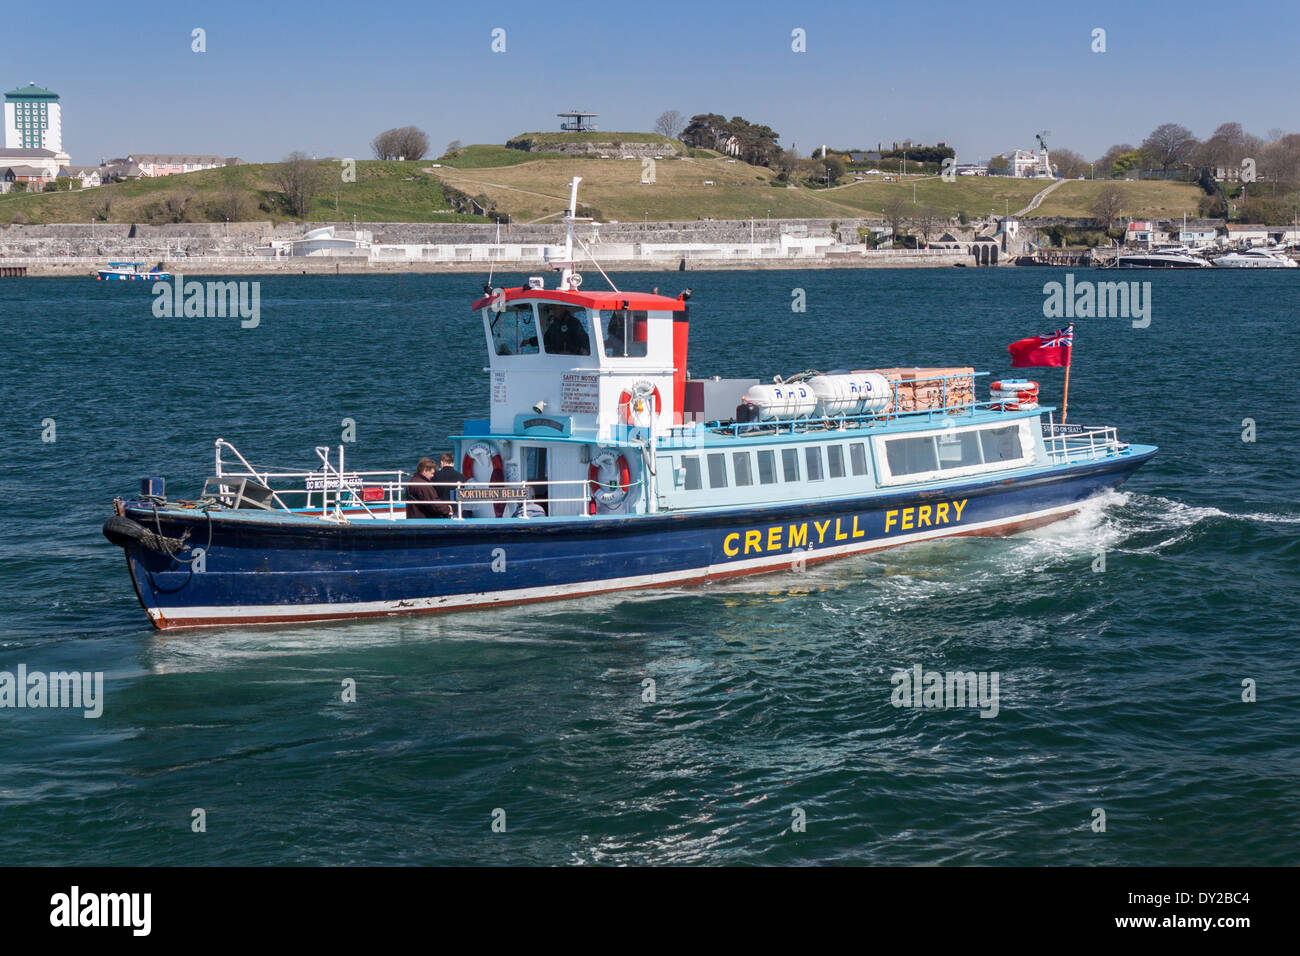 The Cremyll ferry runs across the River Tamar from Admirals Hard in Stonehouse, Plymouth, Devon to Cremyll in Cornwall. Stock Photo